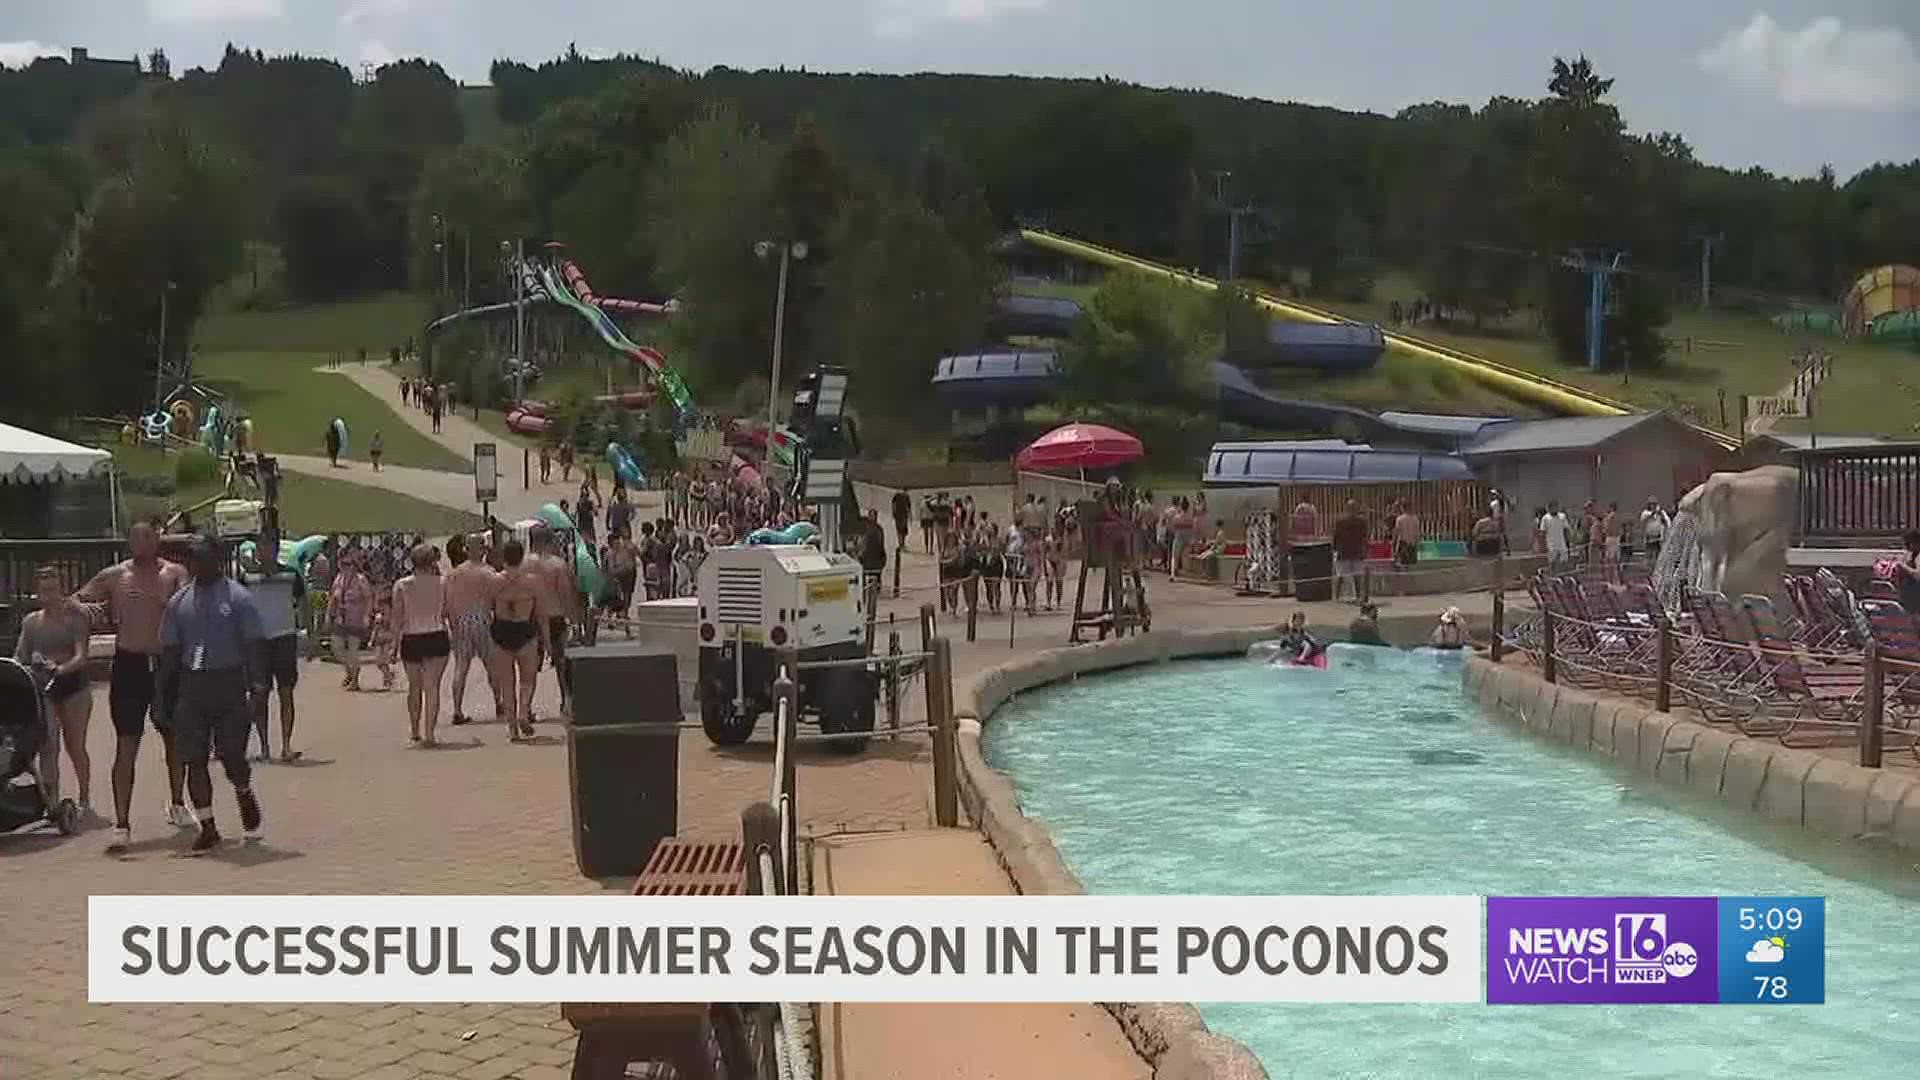 Summer is a very popular season for the Poconos and this year, was much different than the last.